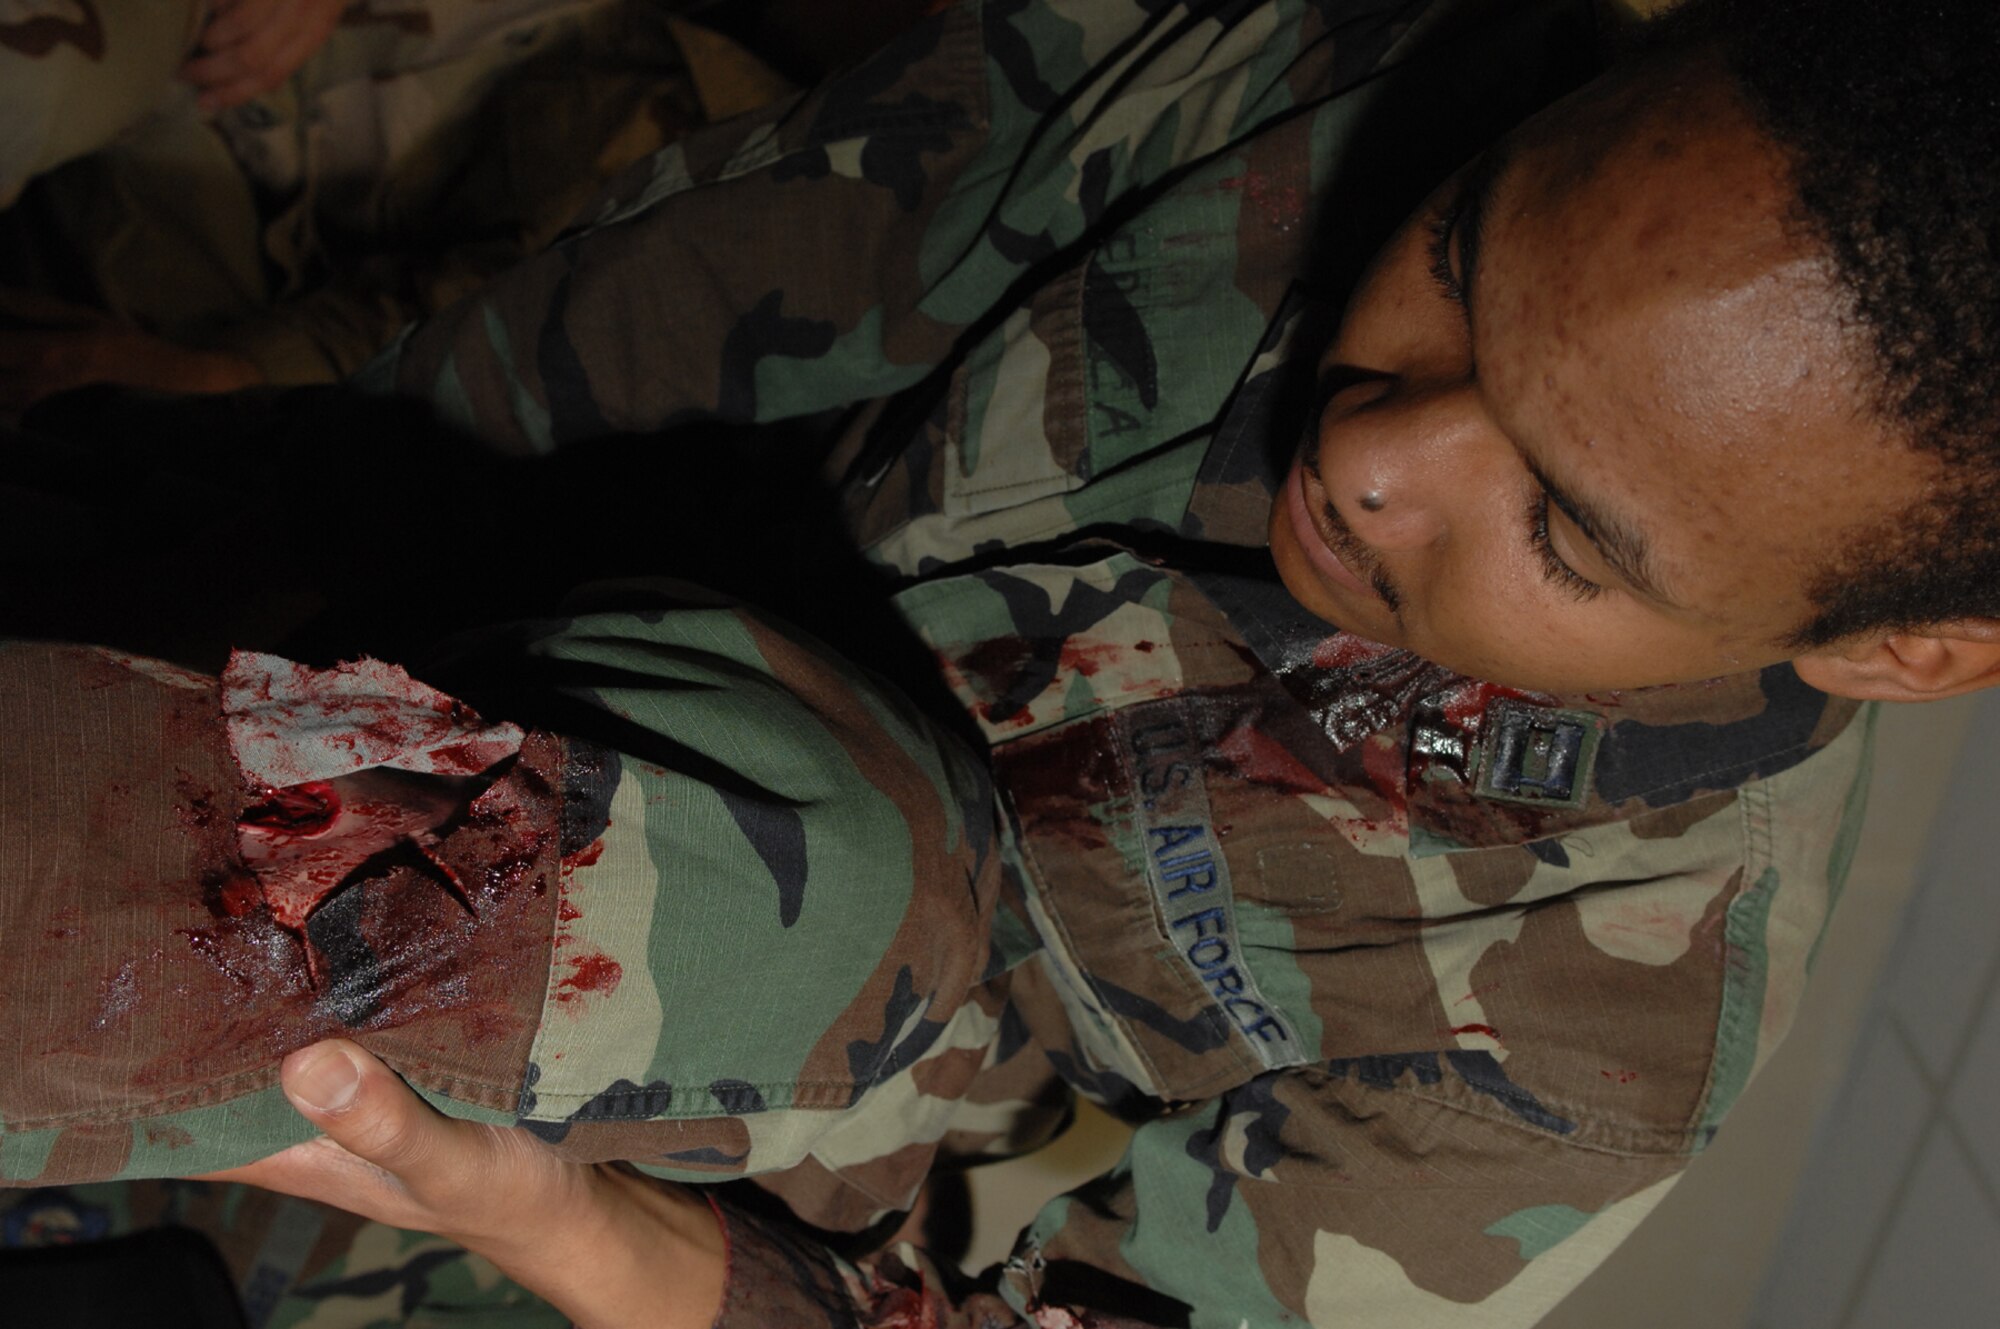 SPANGDAHLEM AIR BASE, Germany -- Airman Brandon Proctor, 606th Air Control Squadron, checks out his new moulage injury during Exercise Saber Crown 08-06, April 22, 2008. (U.S. Air Force photo/Staff Sgt. Kristin Ruleau) 